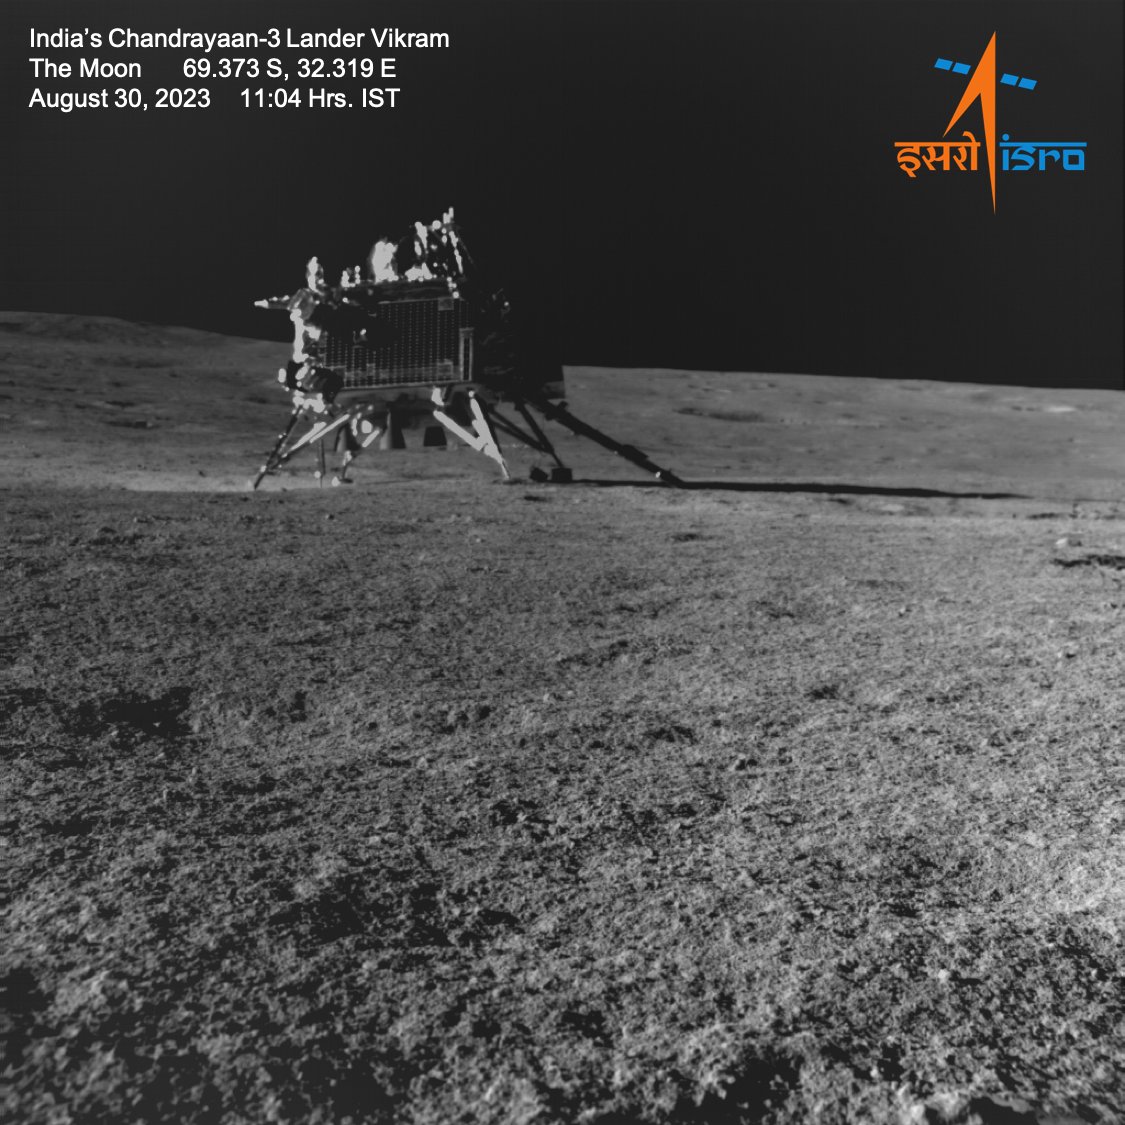 Beyond Borders, Across Moonscapes: India's Majesty knows no bounds!. Once more, co-traveller Pragyan captures Vikram in a Snap! This iconic snap was taken today around 11 am IST from about 15 m. The data from the NavCams is processed by SAC/ISRO, Ahmedabad.